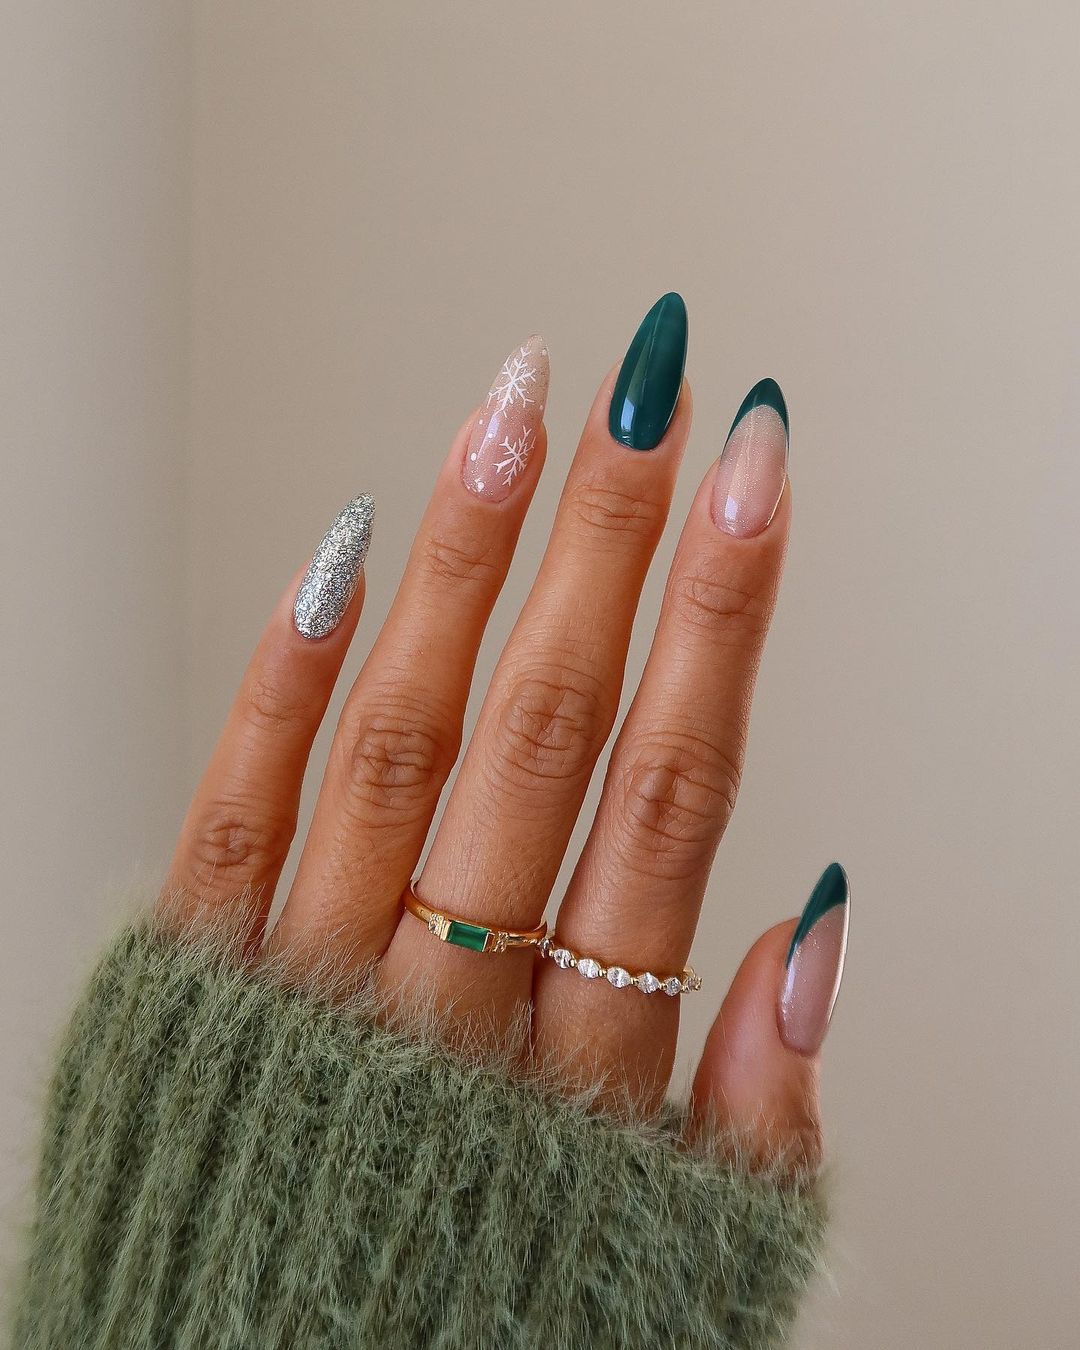 Green and White Nails